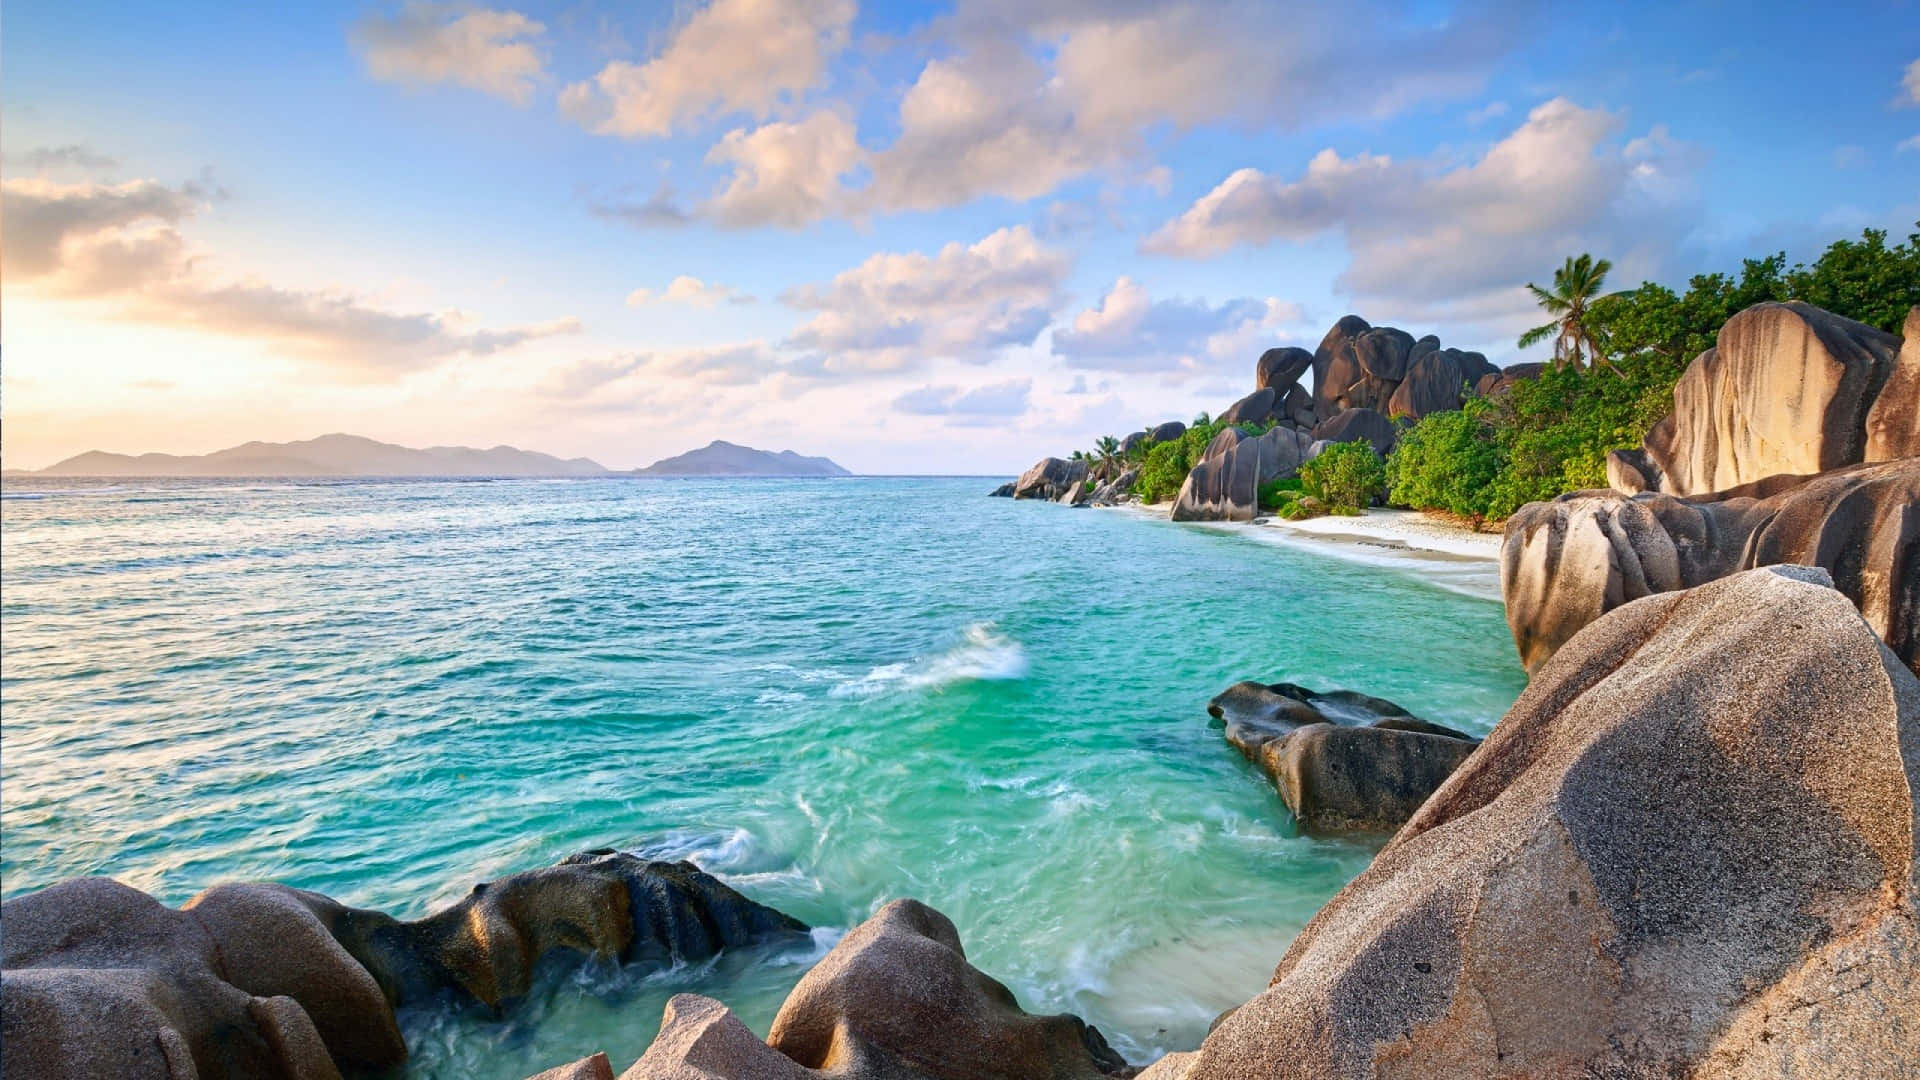 Unwind and Relax at this Tropical Beach Wallpaper